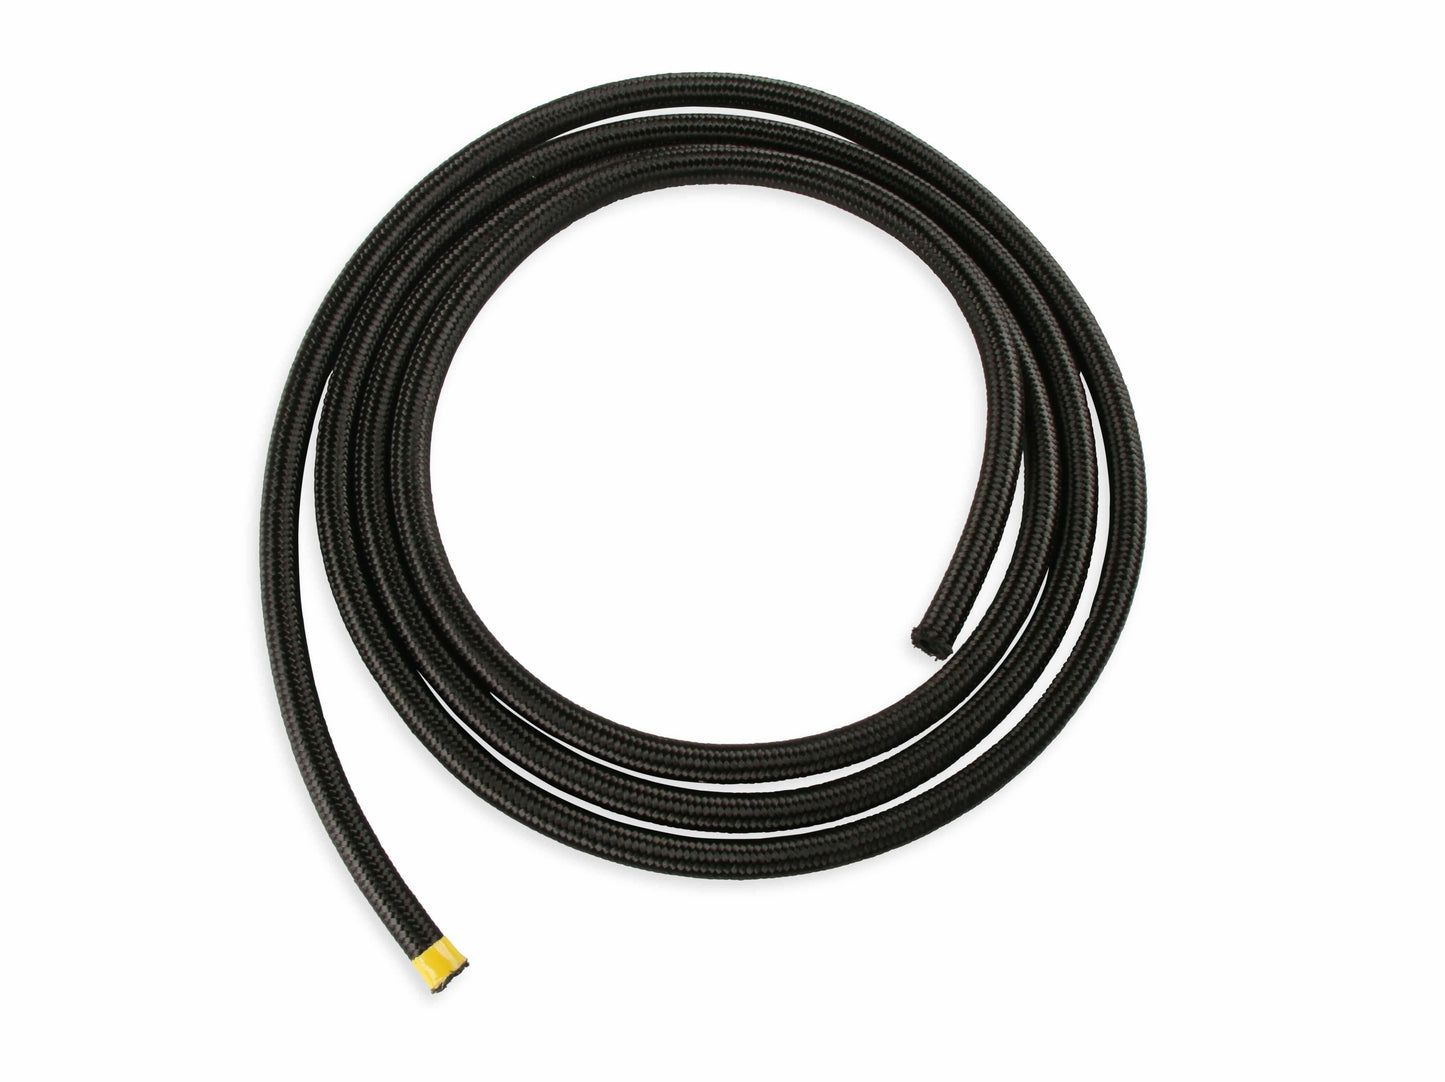 Earls Pro-Lite 390Hose- Size10-Sold Per Foot ContinuousLength upto 35'-390010ERL